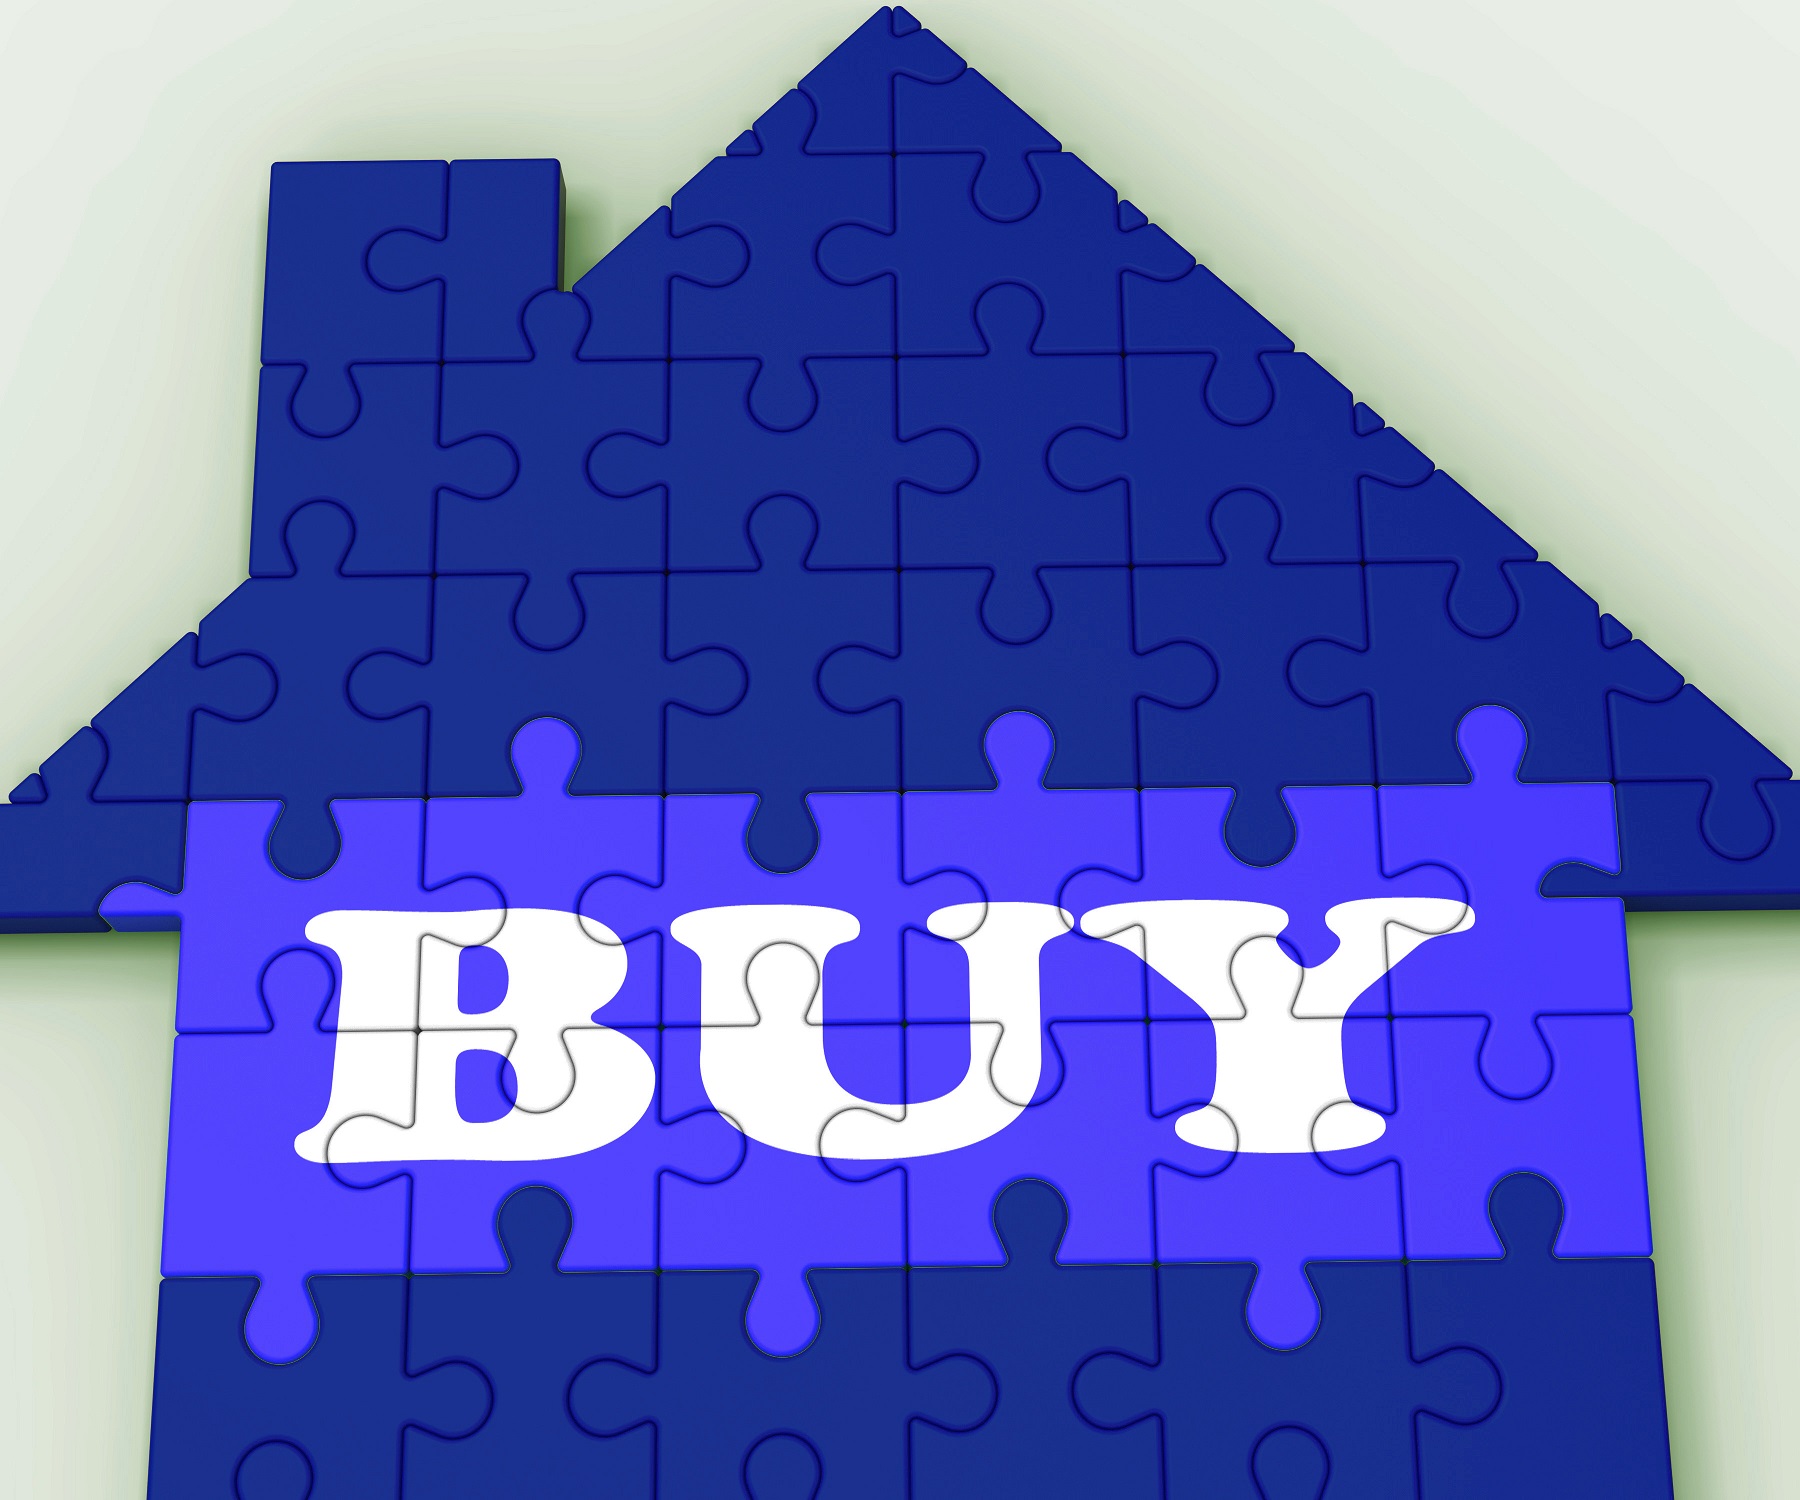 Buying a House